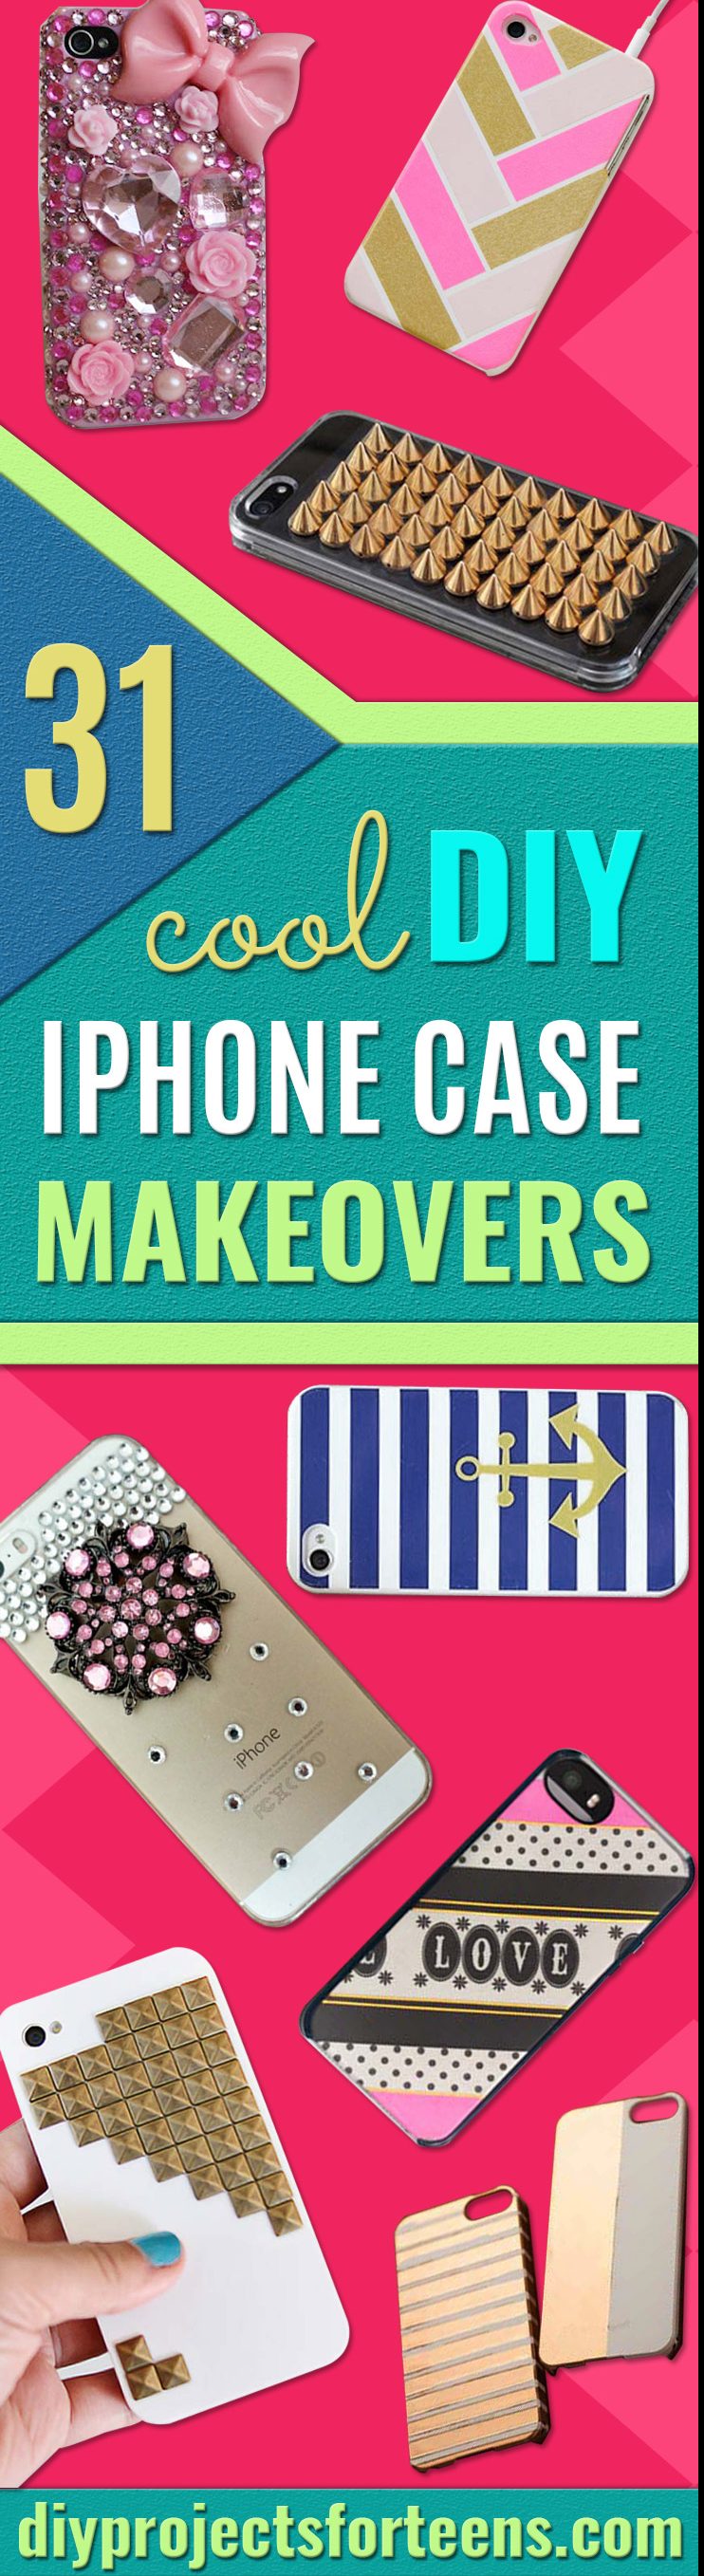 Cool DIY iphone Case Makeovers (31 of Them!)